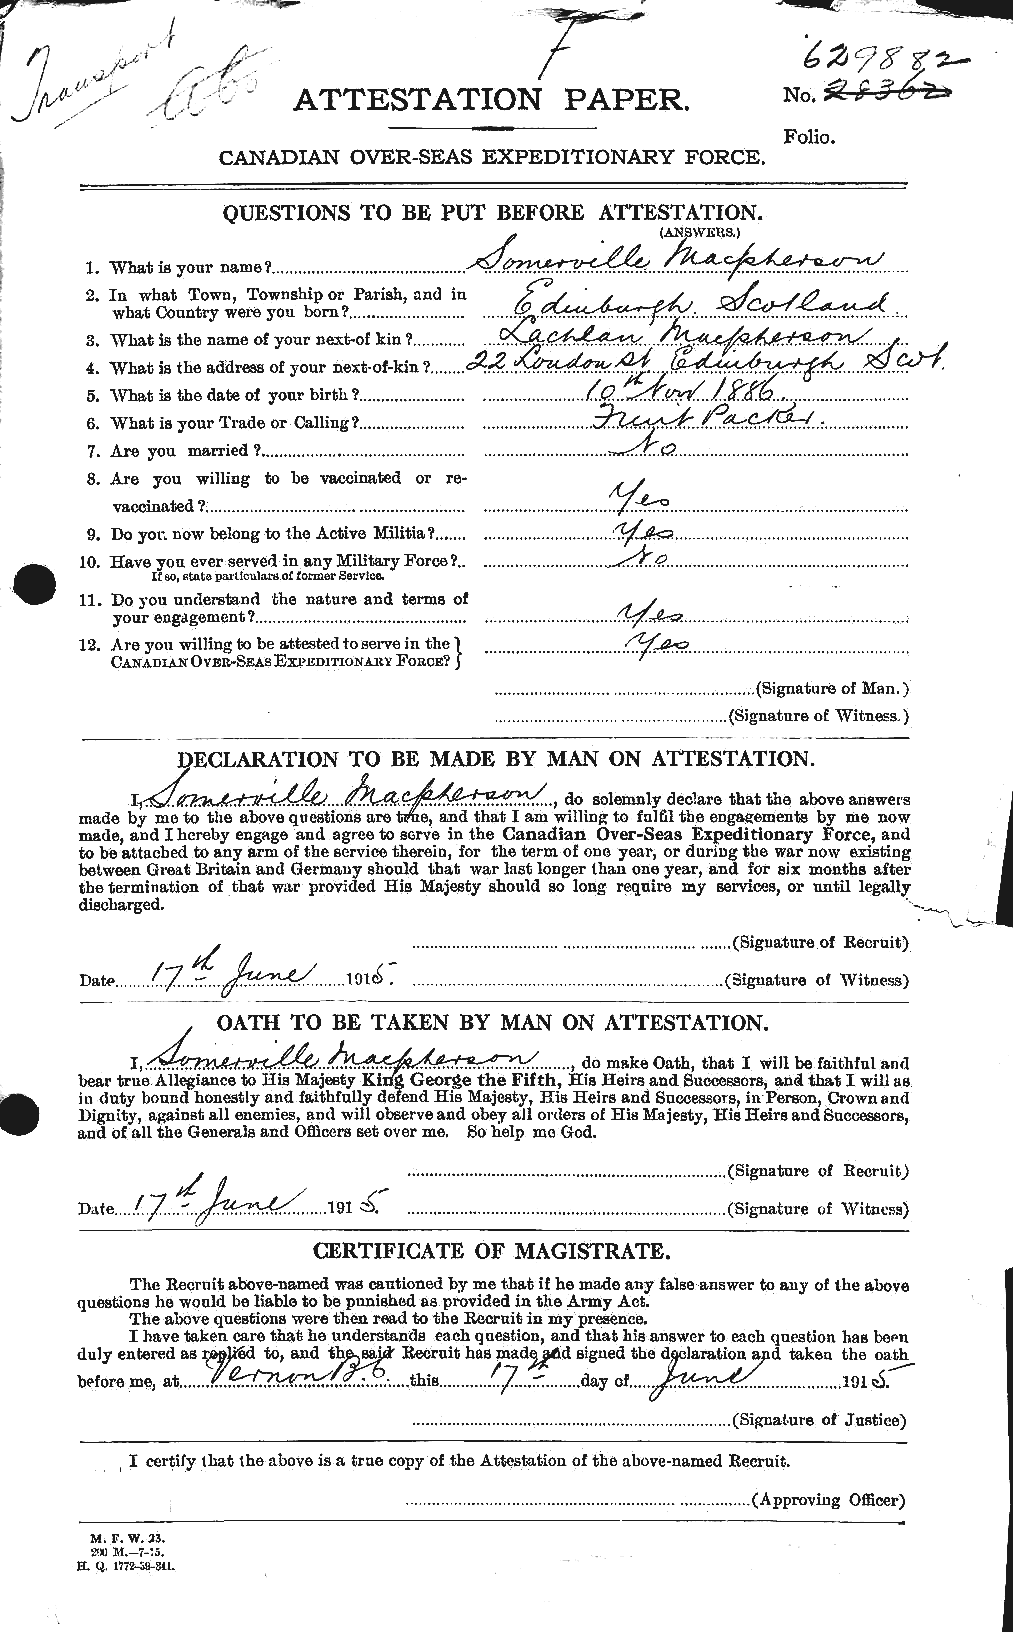 Personnel Records of the First World War - CEF 543295a